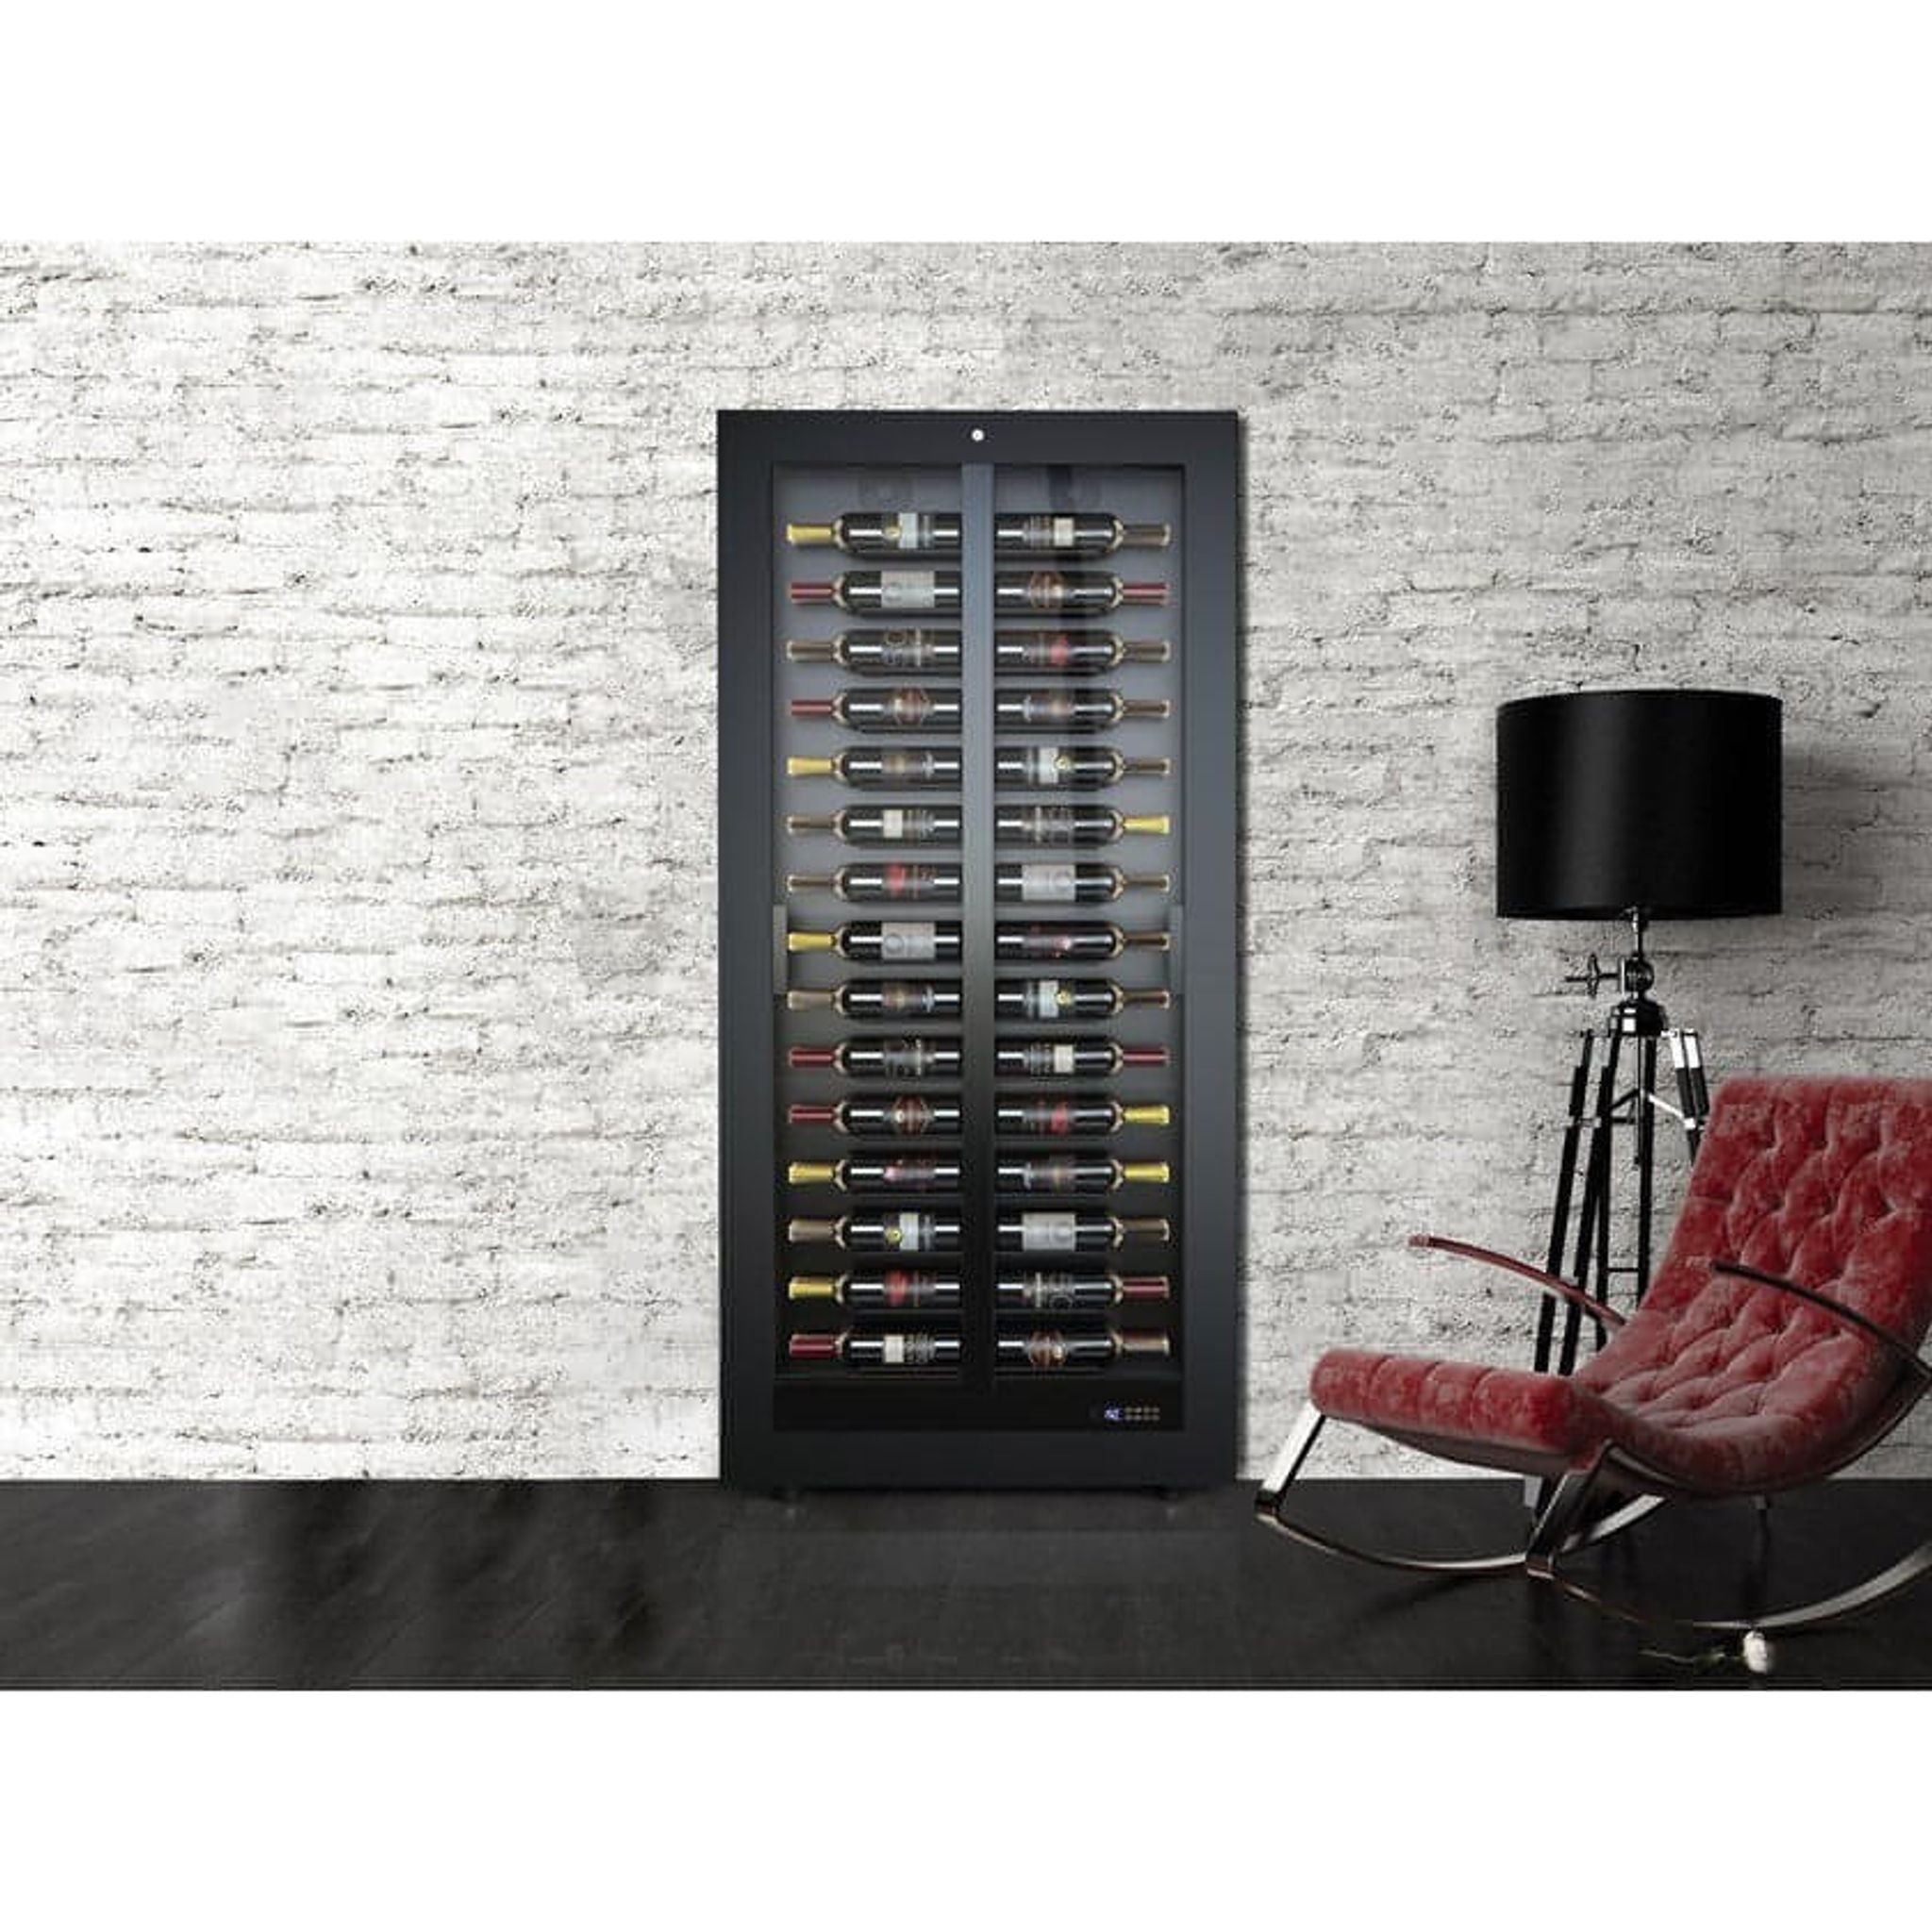 Teca B - Built in Wine Wall TE-B12 - Tilted Shelving - For Home Use